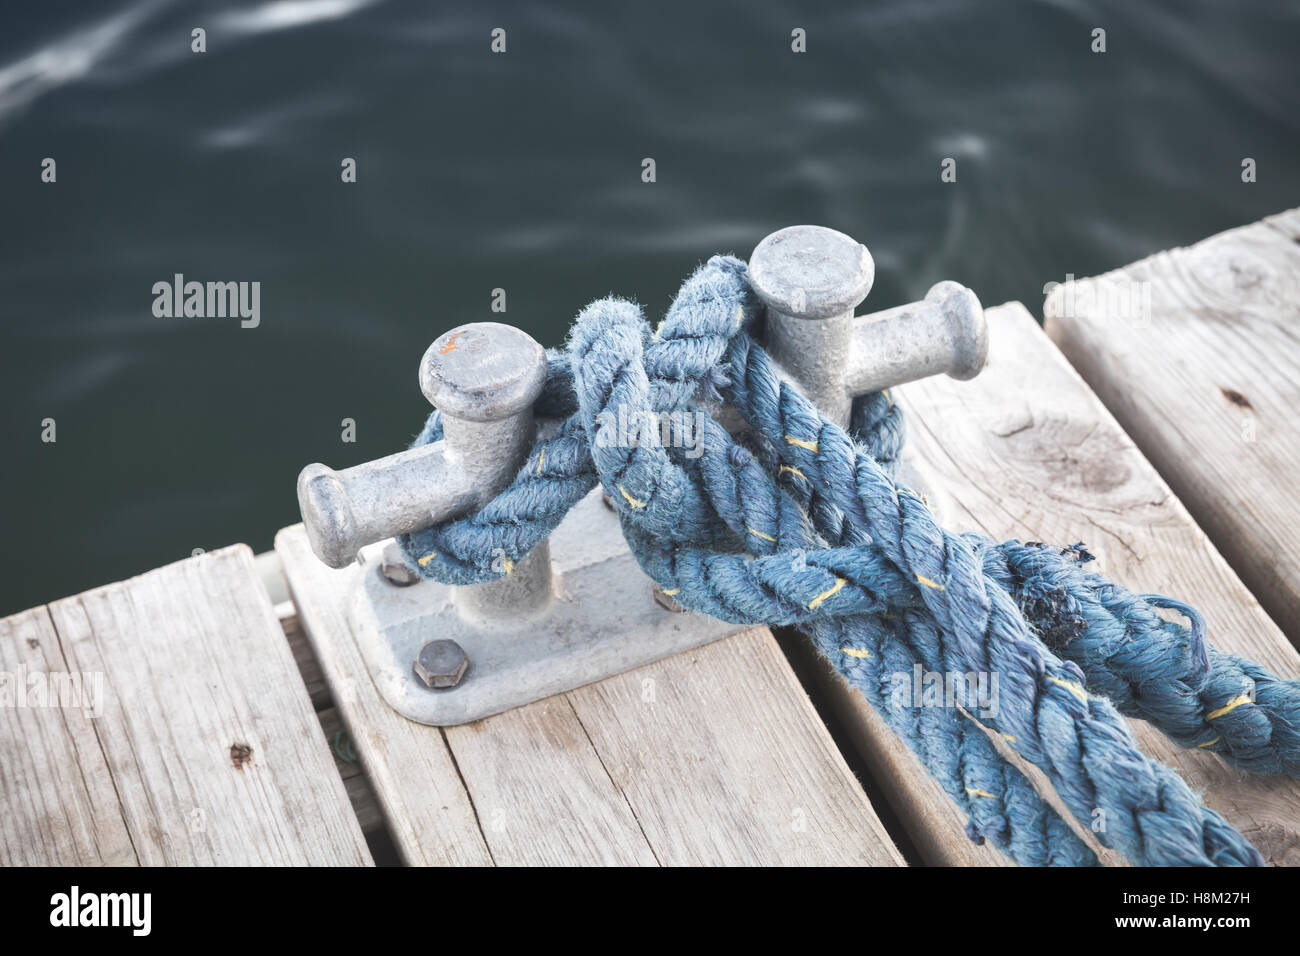 Mooring bollard with tied blue rope mounted on white wooden pier, yacht marina safety equipment Stock Photo